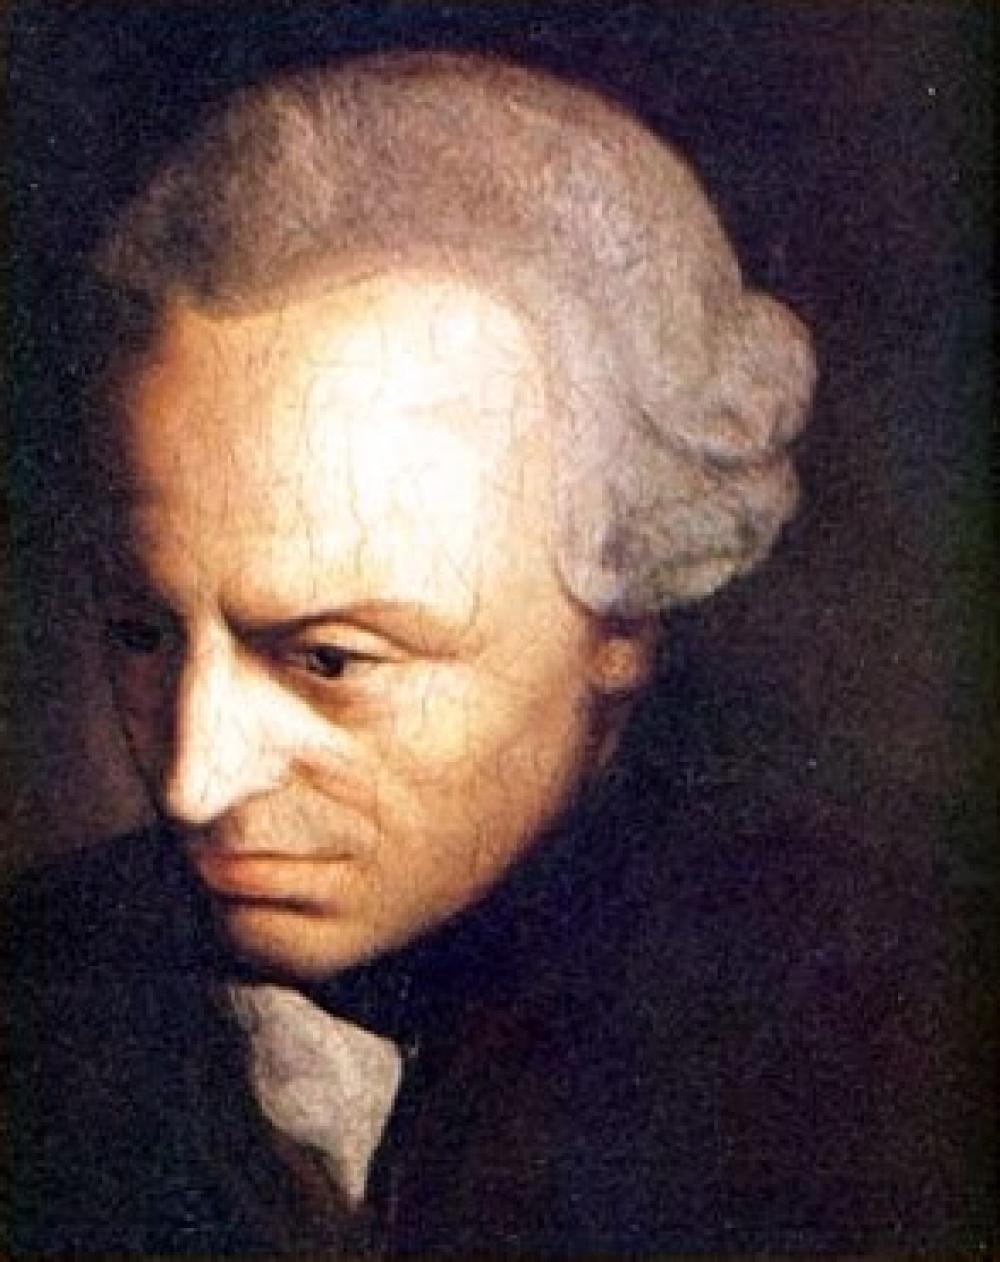 Immanuel Kant 1724 to February 1804 was a German philosopher who is widely considered to be a central figure of modern philosophy. He argued that human concepts and categories structure our view of the world and its laws, and that reason is the source of morality. His thought continues to hold a major influence in contemporary thought, especially in fields such as metaphysics, epistemology, ethics, political philosophy, and aesthetics